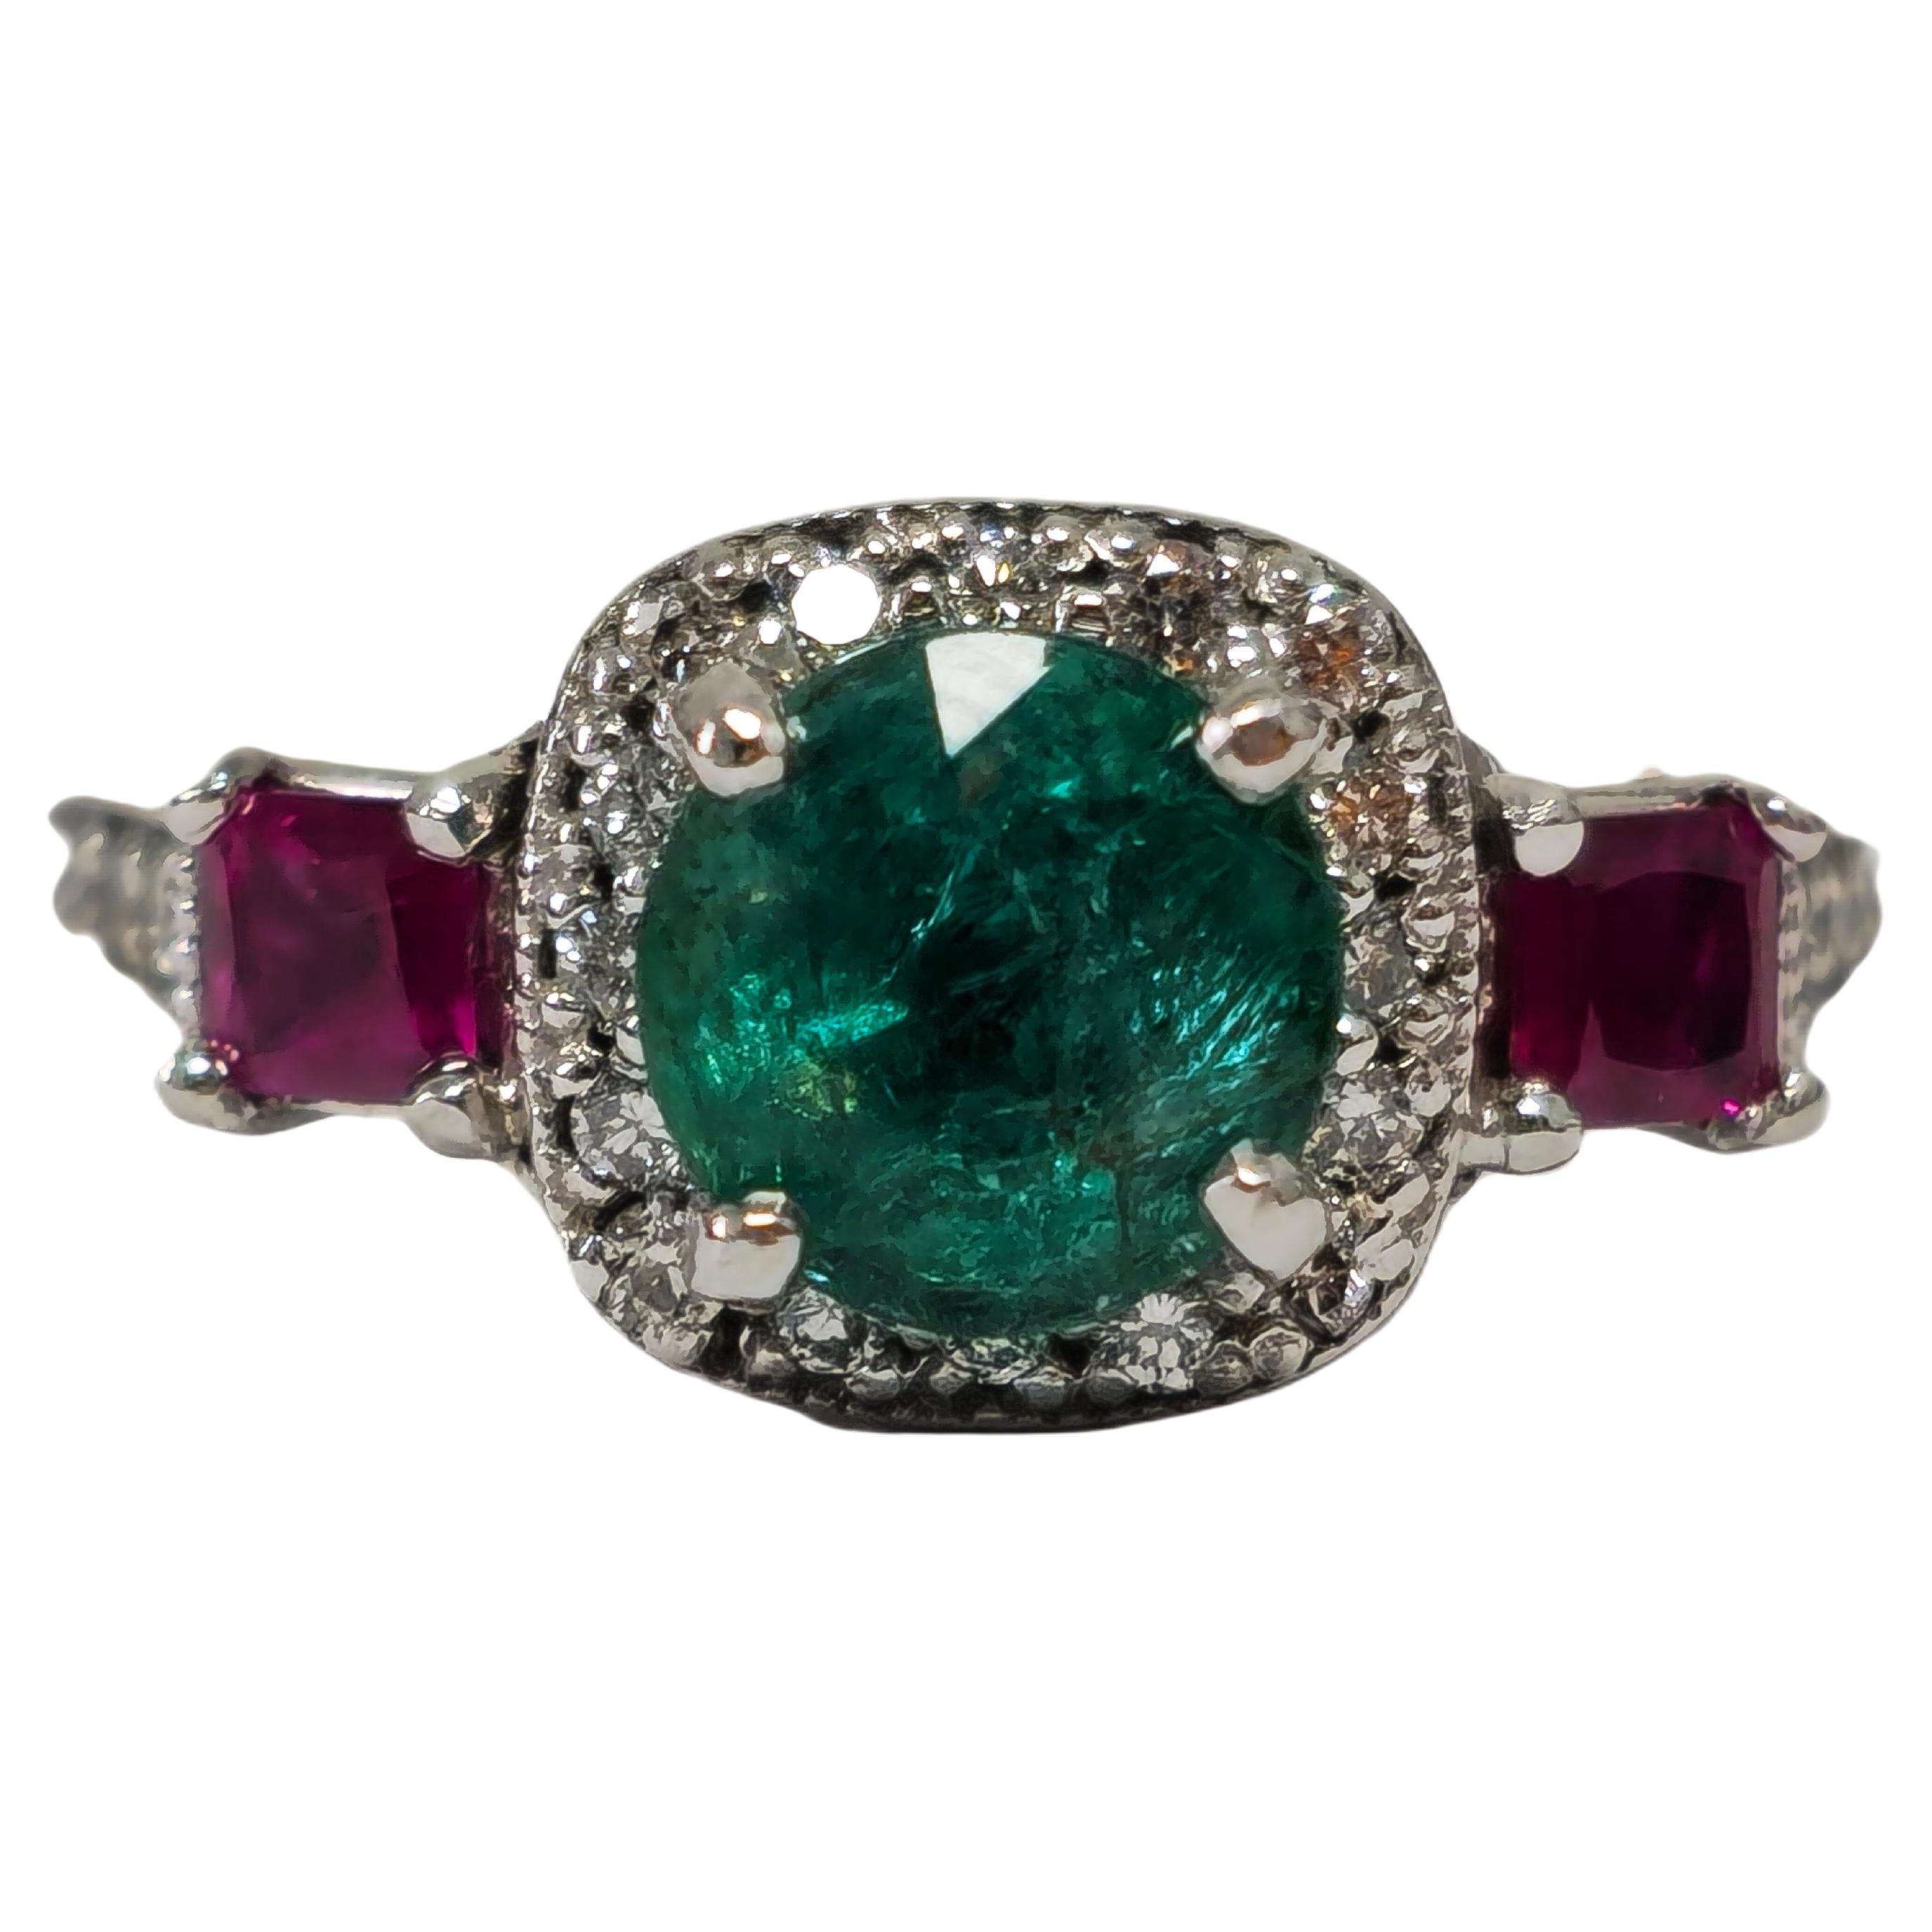 3.25ct Emerald, Ruby & Diamond Cocktail Ring in 14k Gold 